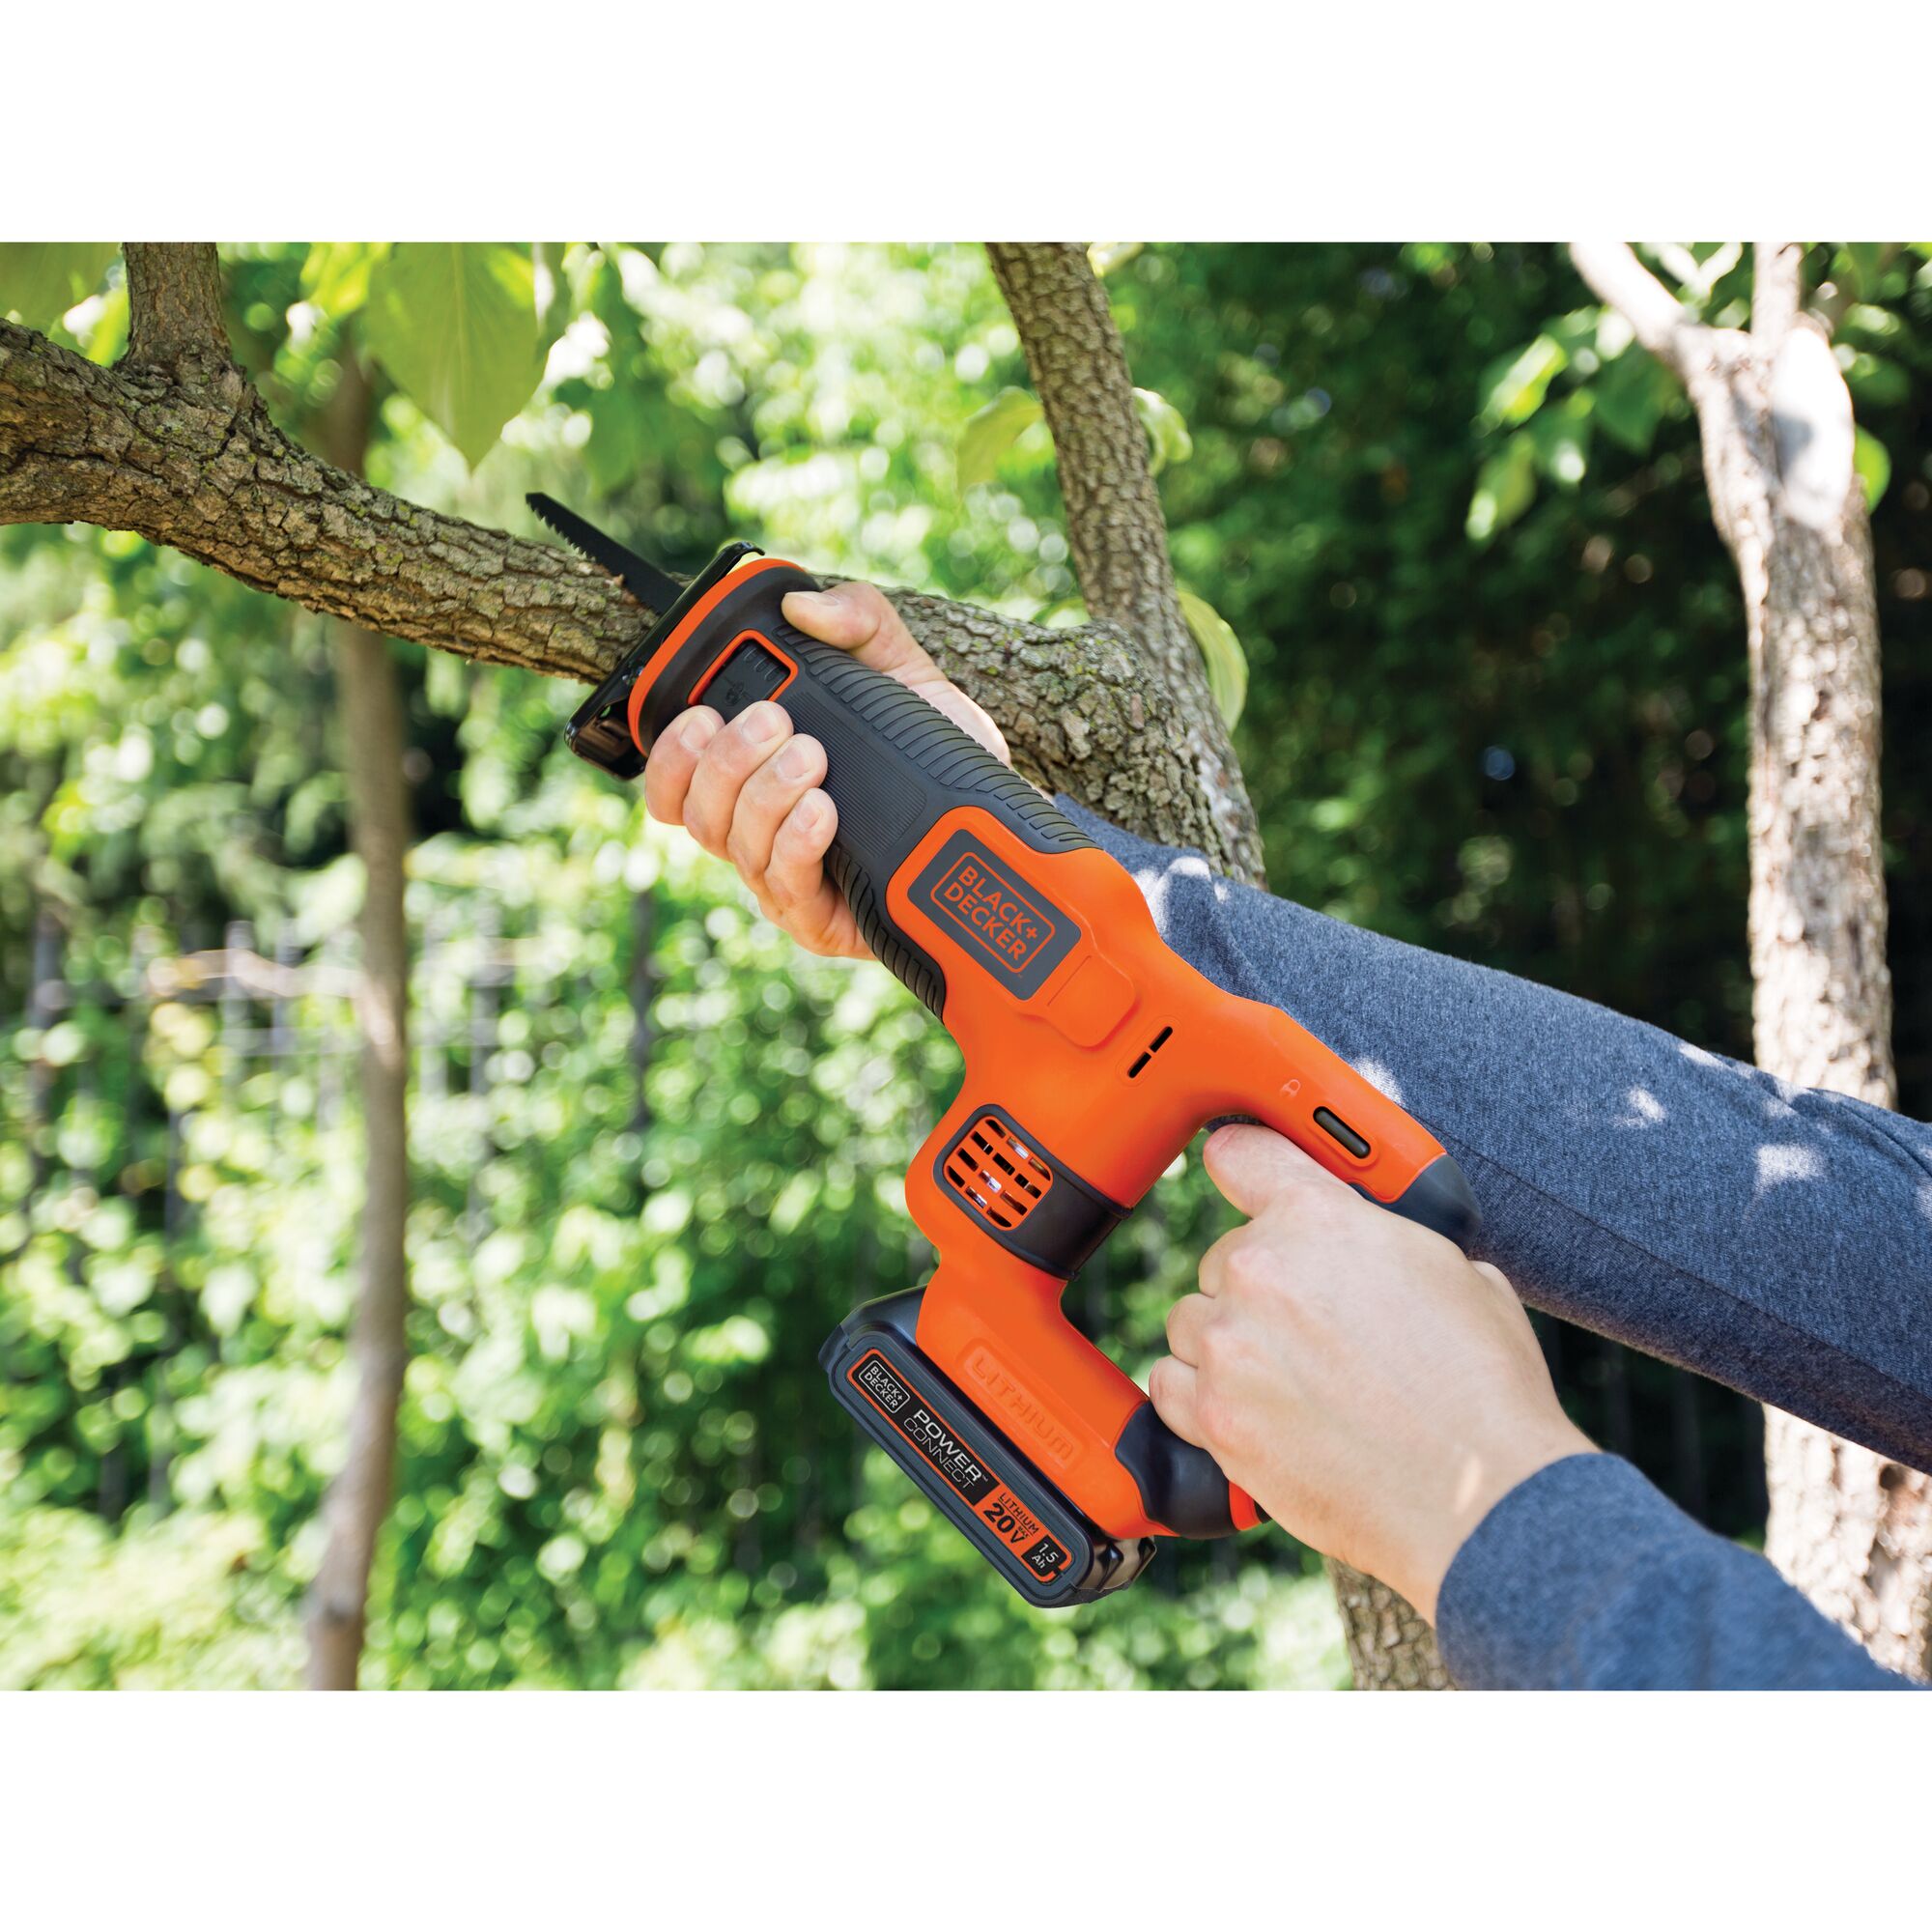 Cordless reciprocating saw being used to saw a branch.